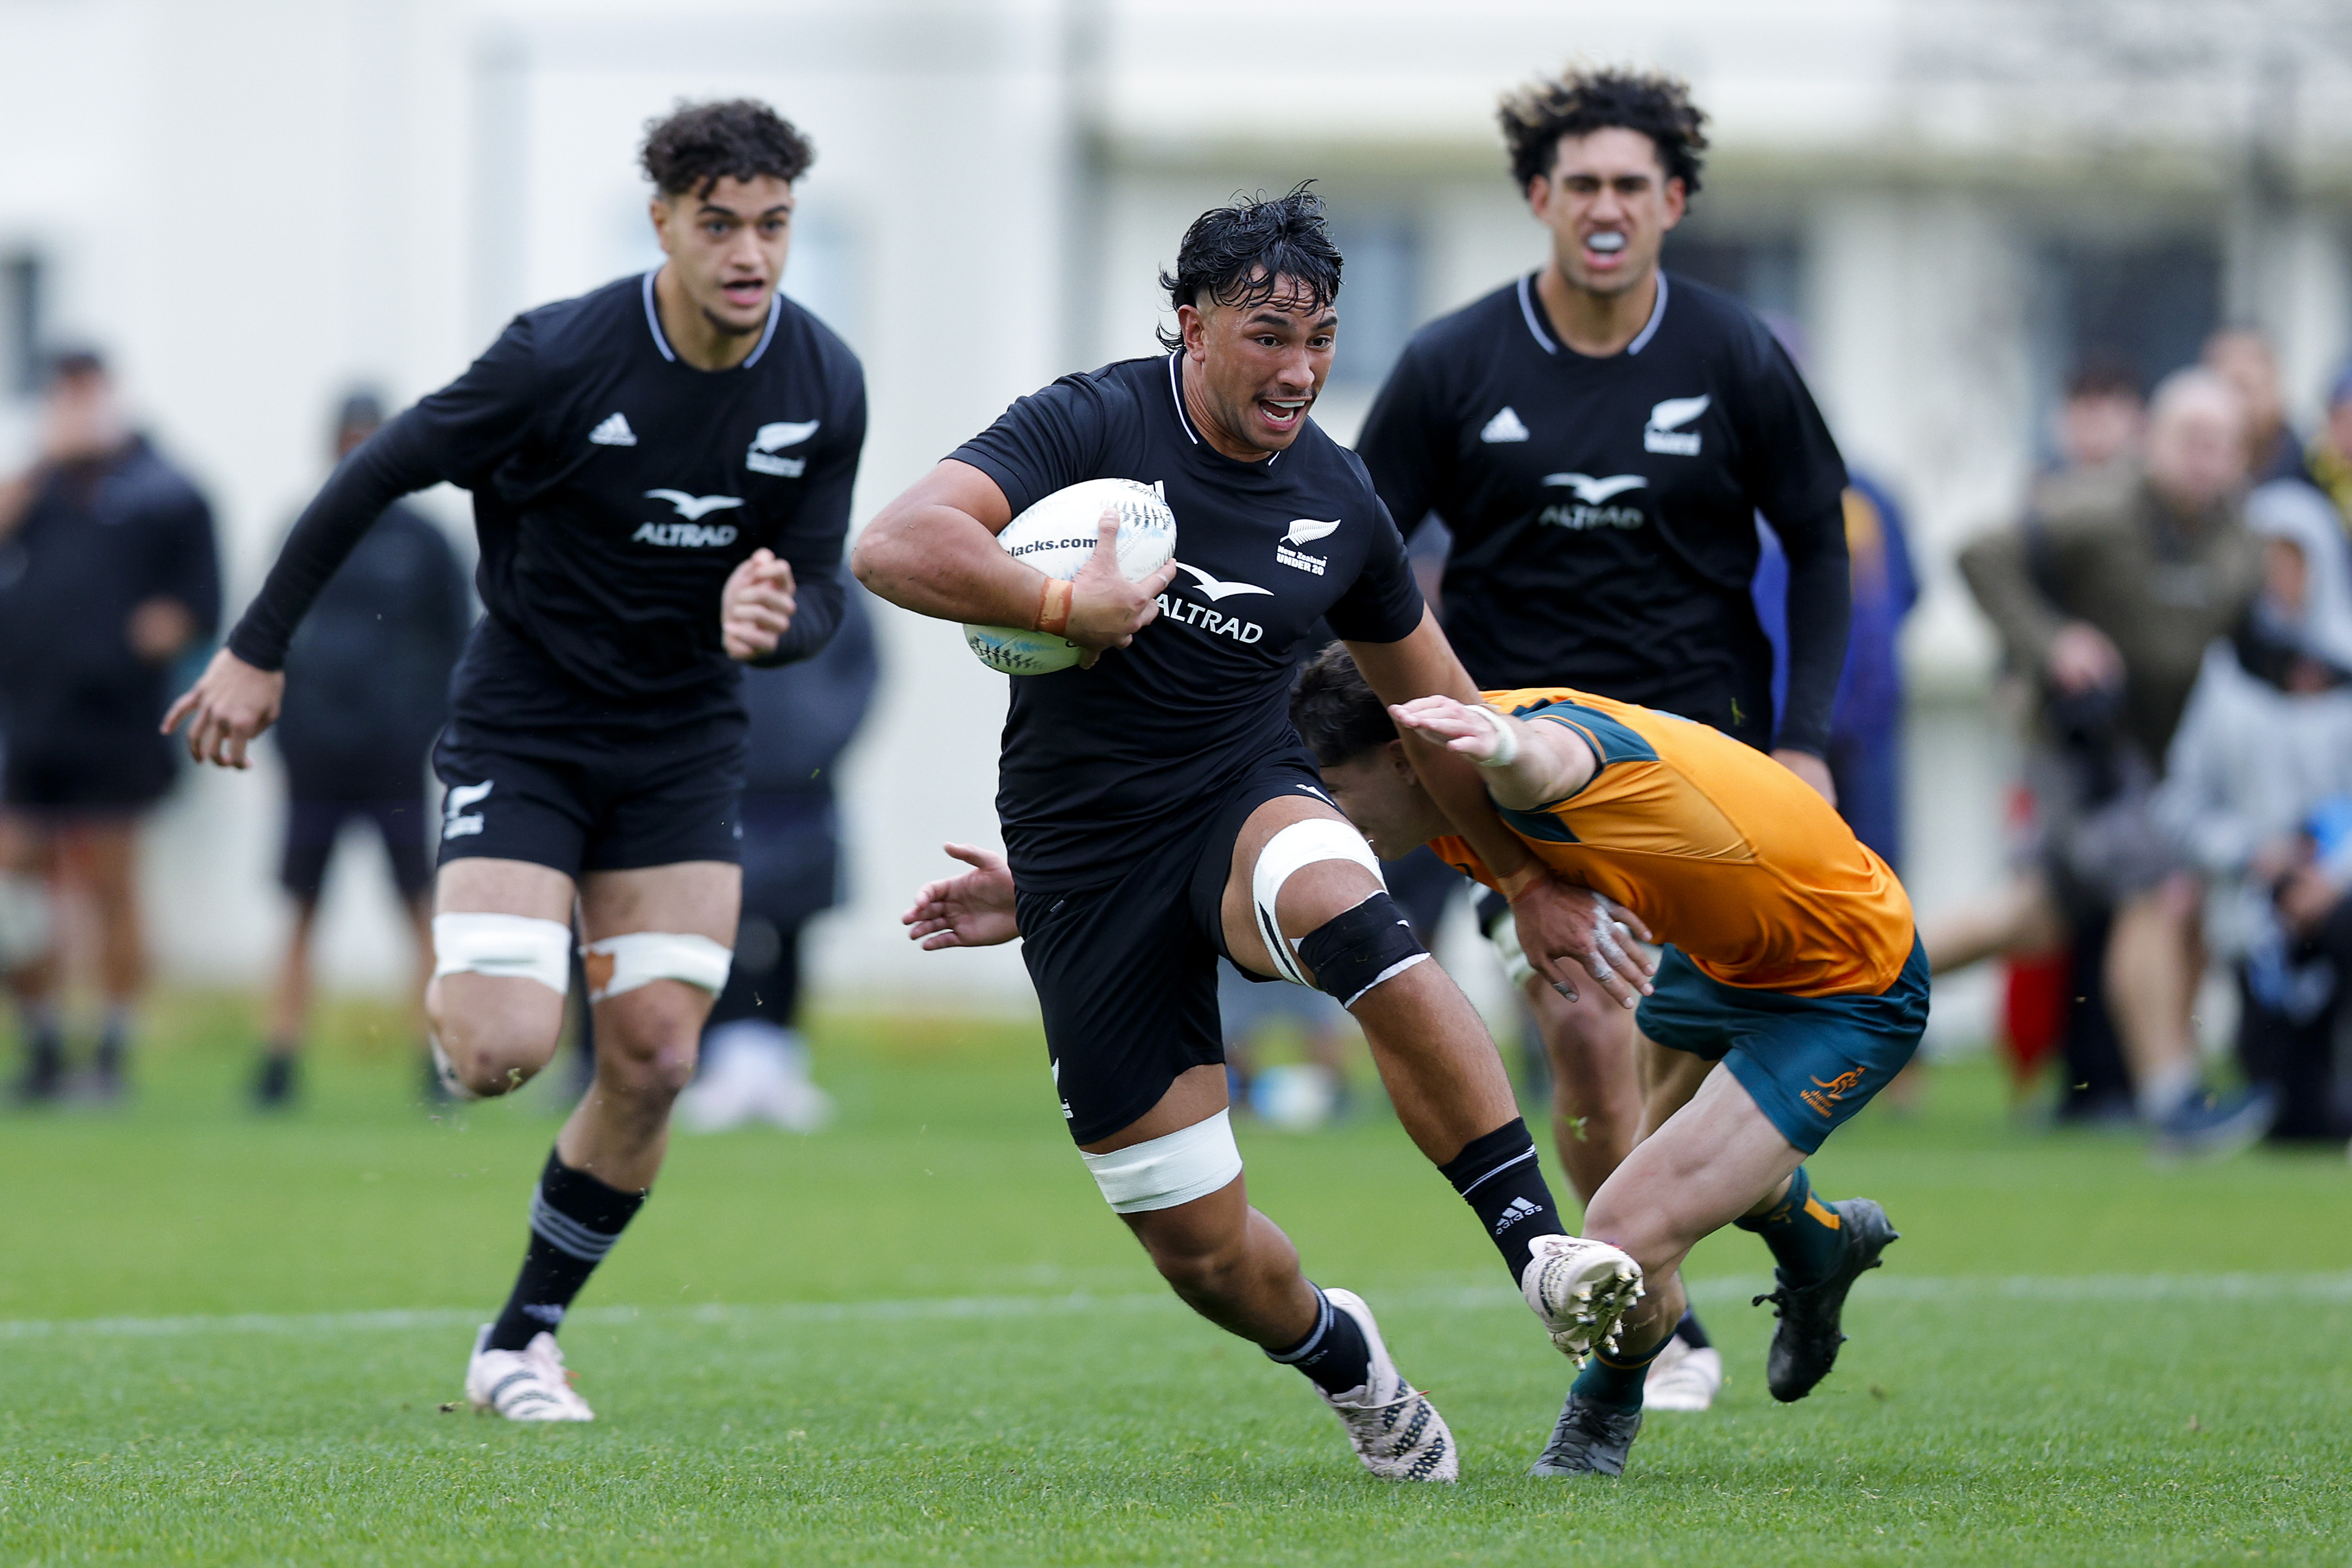 New Zealand Under 20 fall short to the Junior Wallabies in game one » allblacks